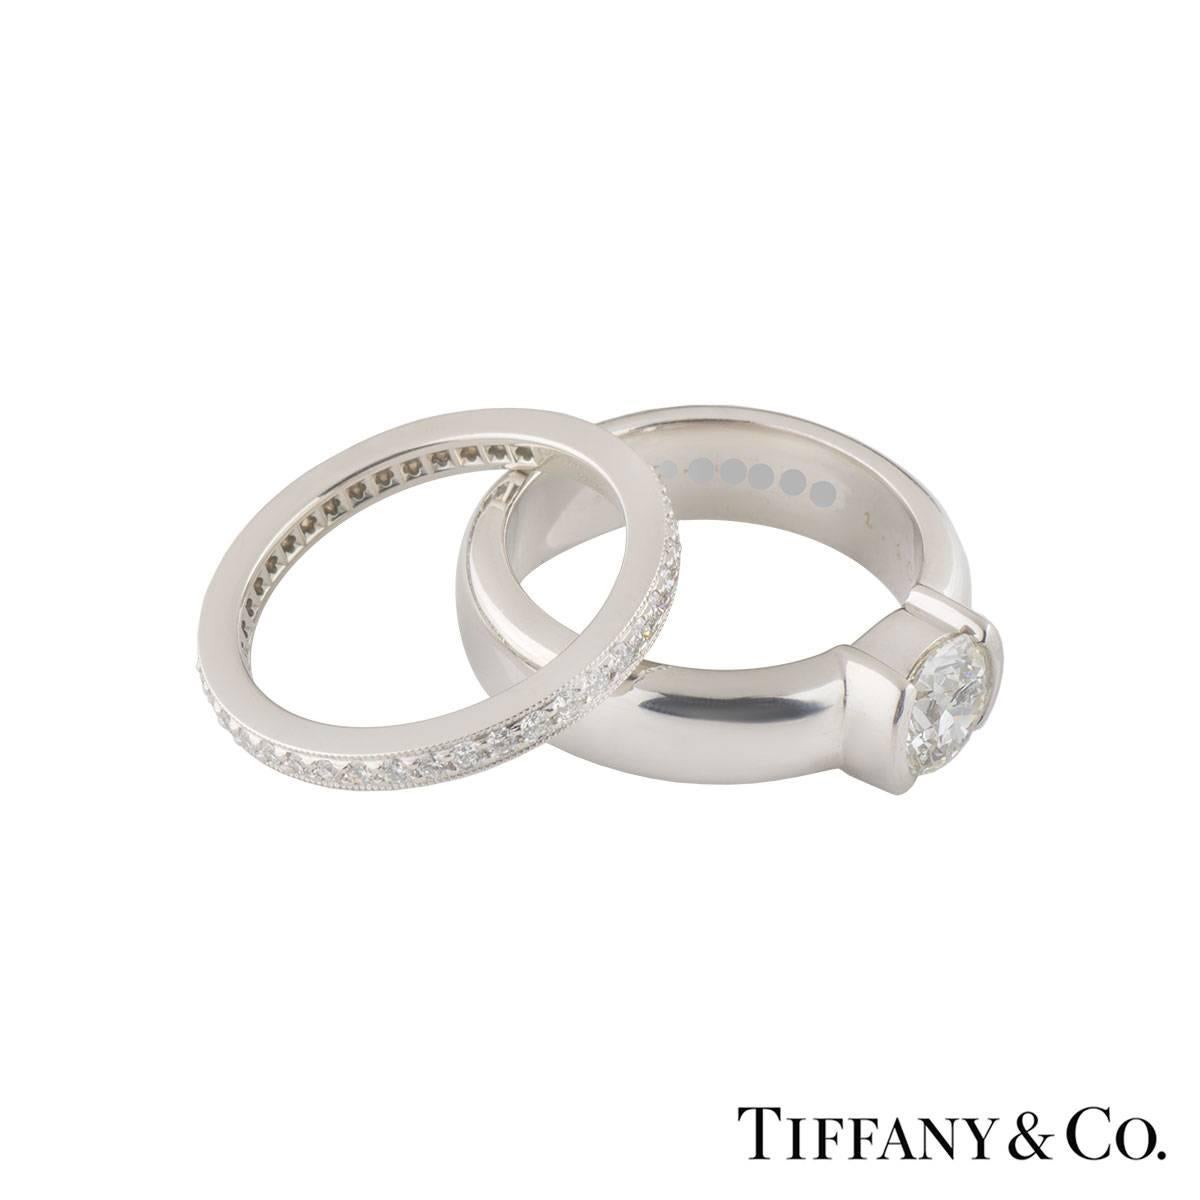 A beautiful diamond set full eternity Tiffany & Co. ring in platinum from the Legacy collection and a sparkly diamond engagement ring from the Etoile collection. The engagement ring comprises of a round brilliant cut diamond in a rubover setting